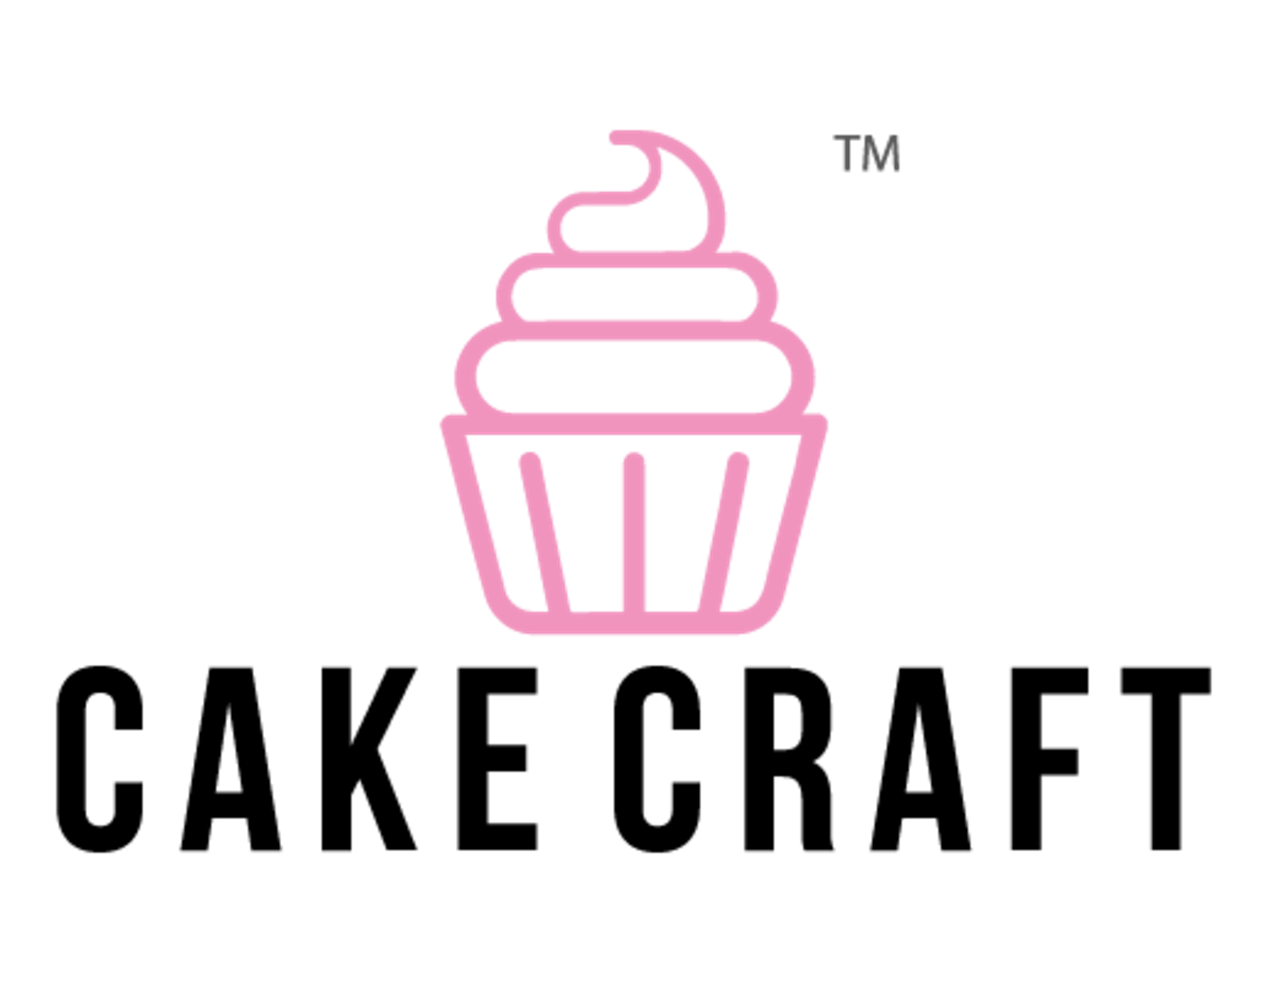 Cake Craft USA: Surplus Processing and Packaging Equipment to the Ongoing Operations